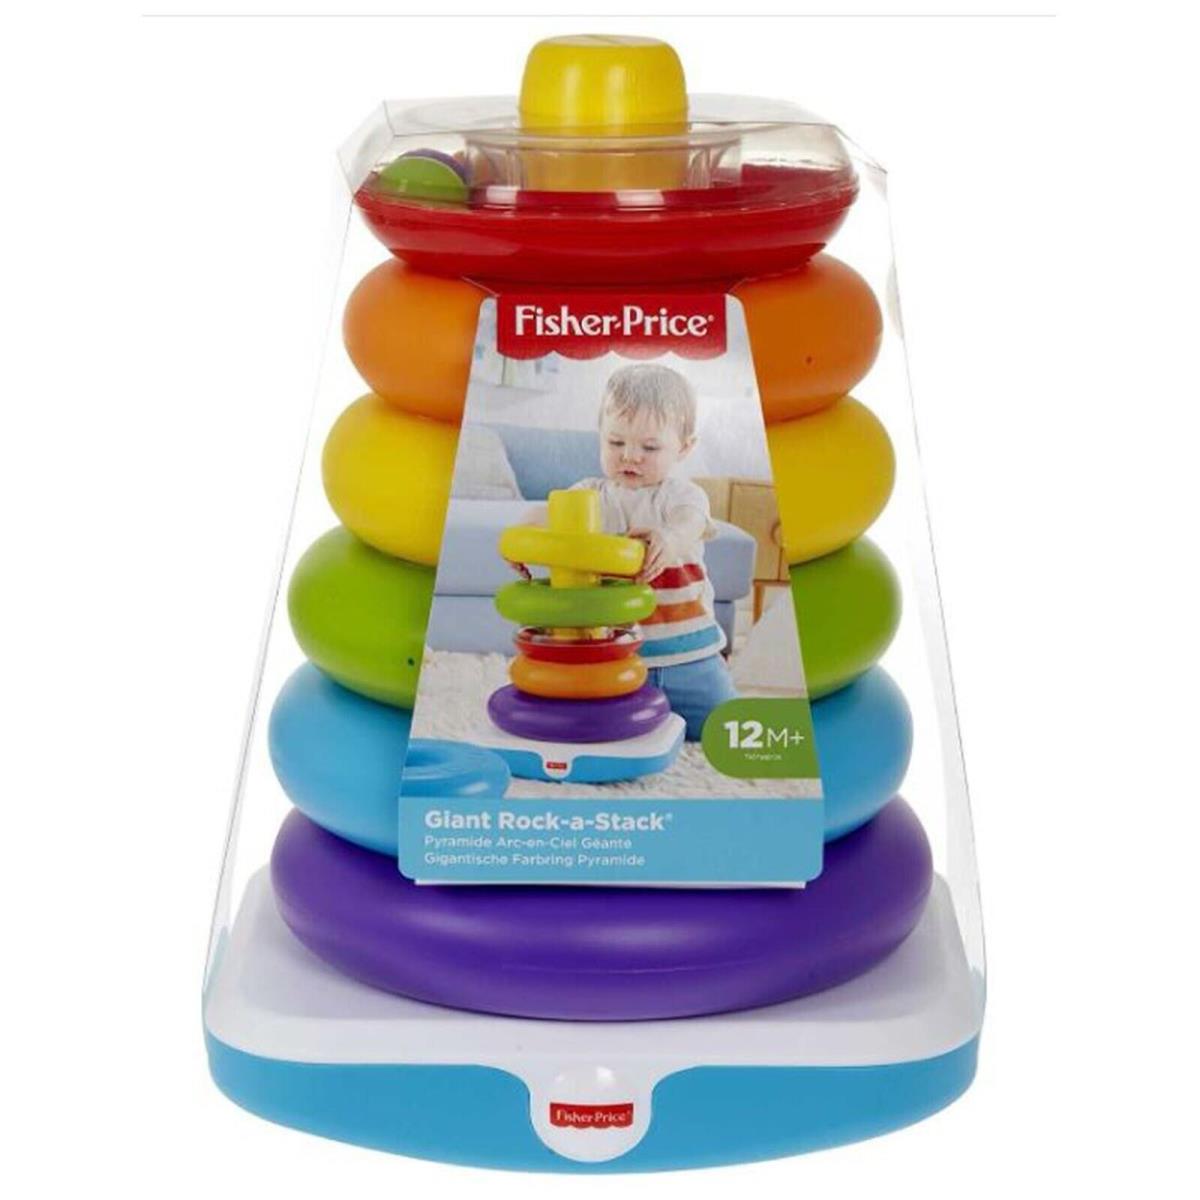 Fisher Price Giant Rock-a-stack Baby Activity Toy IN Stock